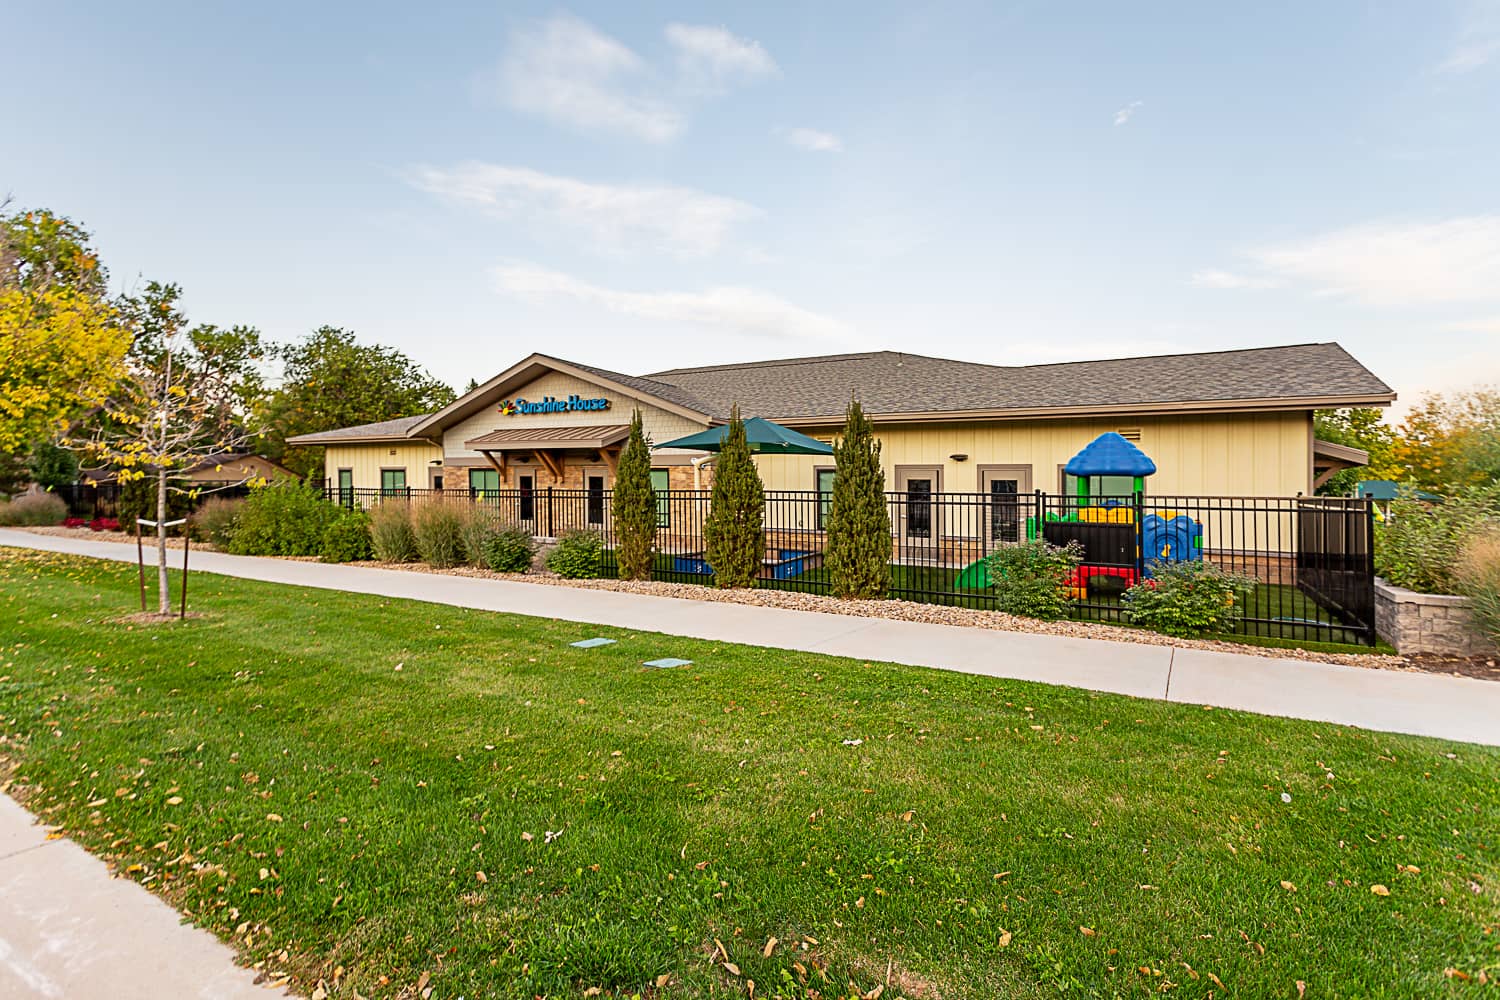 Exterior of Day Care Facility